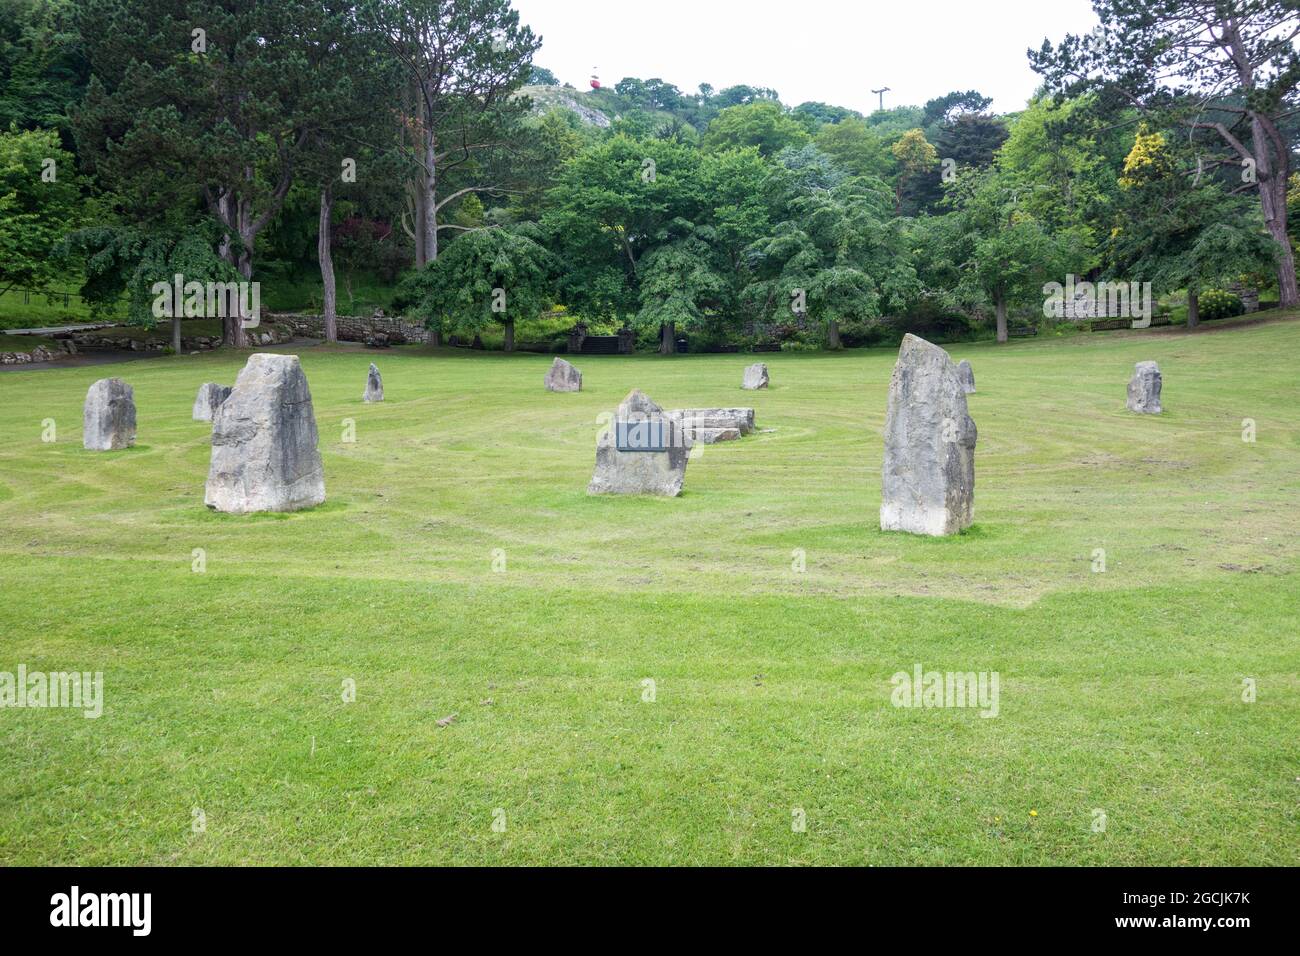 The Gorsedd stone circle in Llandudno Wales, which is a modern day stone circle Stock Photo